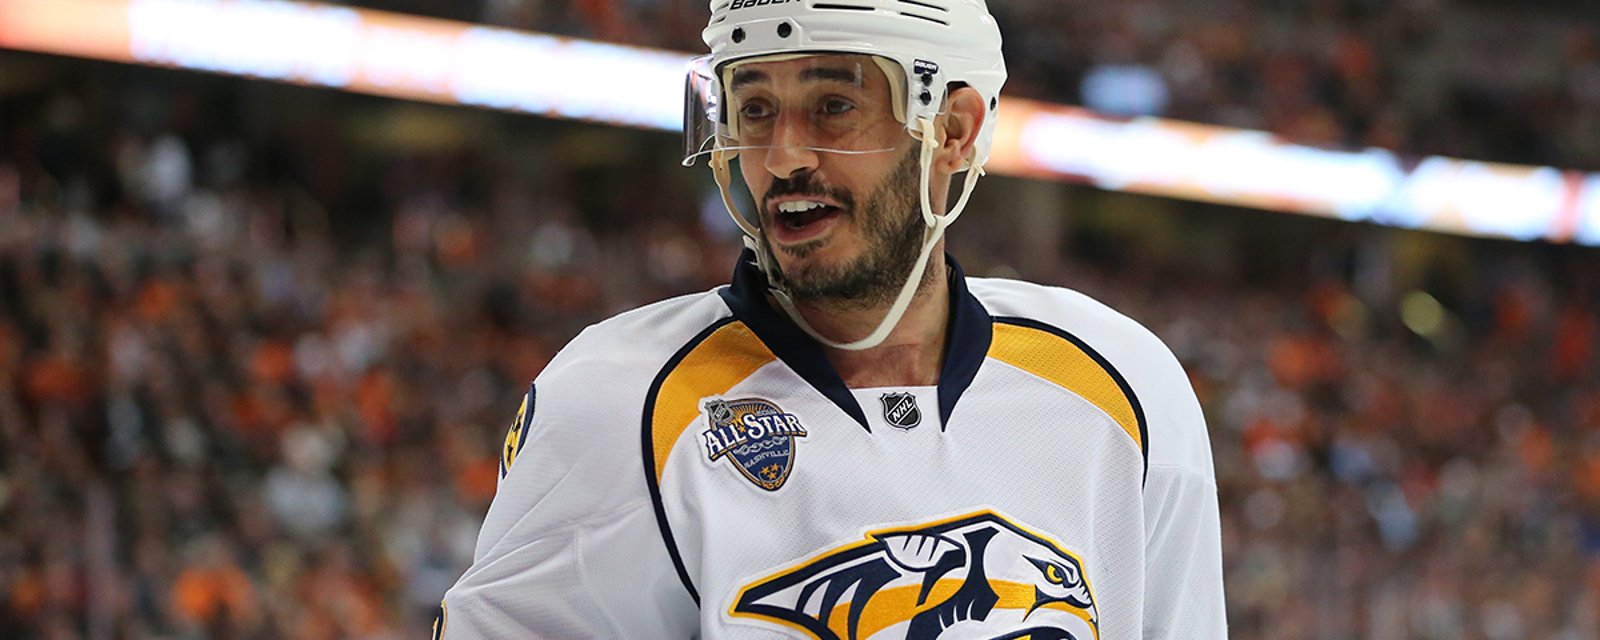 Breaking: Former NHL star Ribeiro enters rehab, will officially retire from NHL